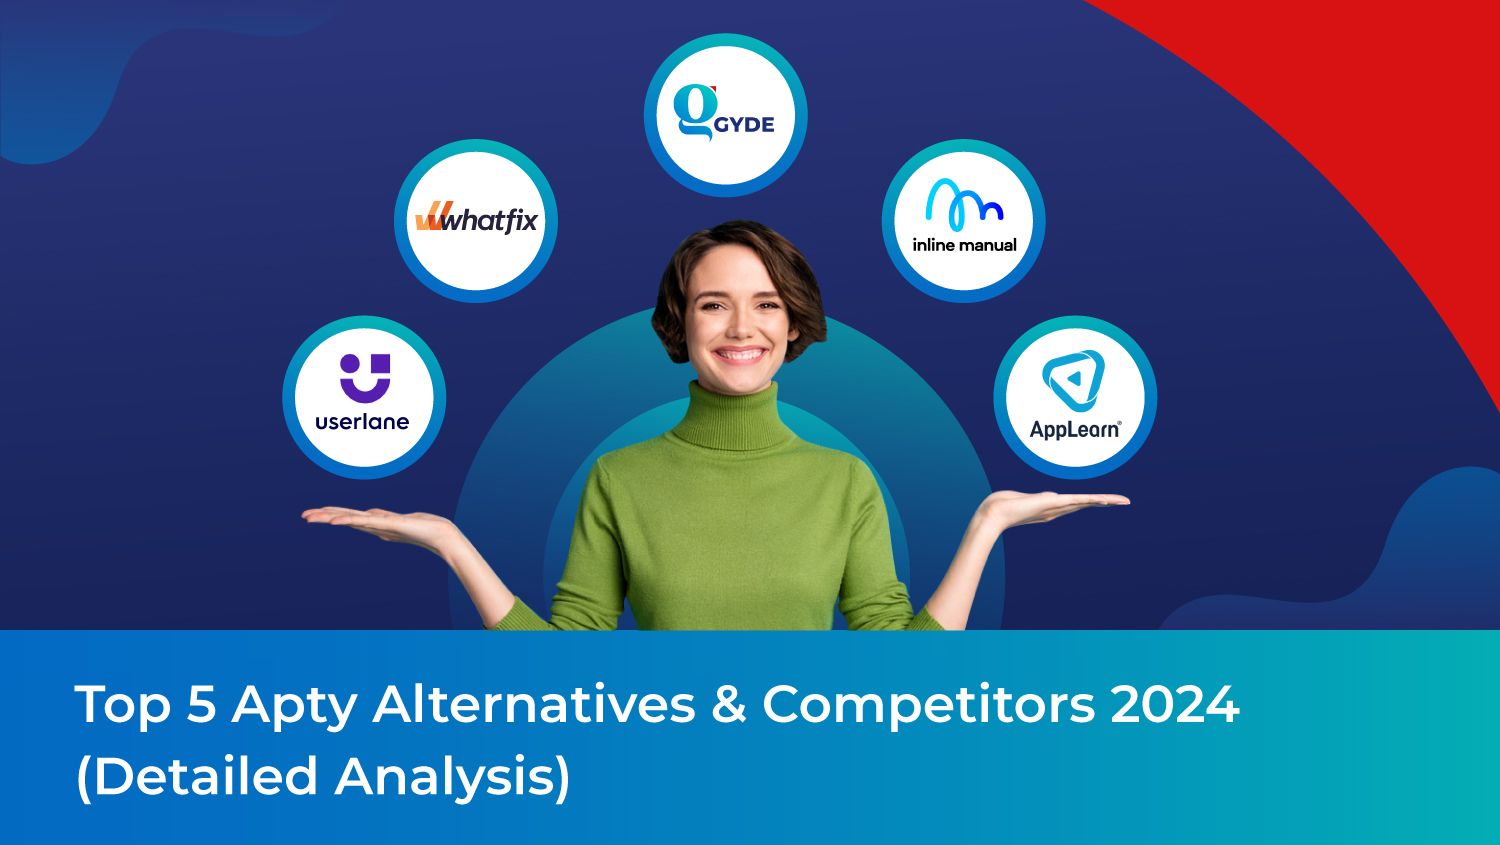 Top 5 Apty Alternatives & Competitors 2024 (Detailed Analysis)